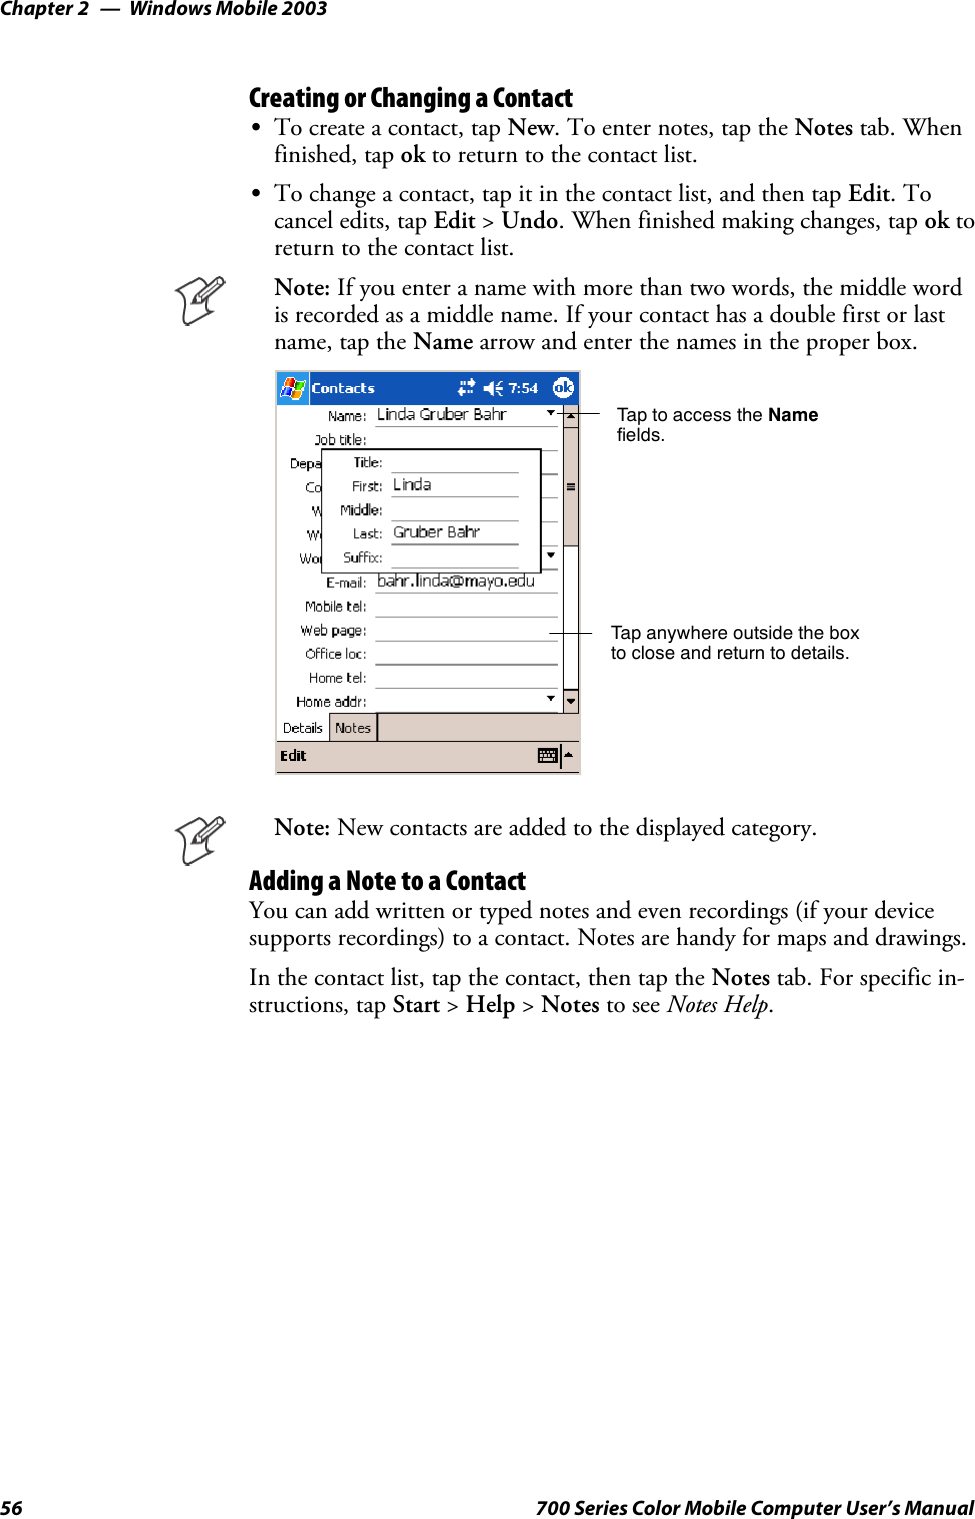 Windows Mobile 2003Chapter —256 700 Series Color Mobile Computer User’s ManualCreating or Changing a ContactSTo create a contact, tap New. To enter notes, tap the Notes tab. Whenfinished, tap ok to return to the contact list.STo change a contact, tap it in the contact list, and then tap Edit.Tocancel edits, tap Edit &gt;Undo. When finished making changes, tap ok toreturn to the contact list.Note: Ifyouenteranamewithmorethantwowords,themiddlewordis recorded as a middle name. If your contact has a double first or lastname, tap the Name arrow and enter the names in the proper box.Tap to access the Namefields.Tap anywhere outside the boxto close and return to details.Note: New contacts are added to the displayed category.Adding a Note to a ContactYou can add written or typed notes and even recordings (if your devicesupports recordings) to a contact. Notes are handy for maps and drawings.In the contact list, tap the contact, then tap the Notes tab. For specific in-structions, tap Start &gt;Help &gt;Notes to see Notes Help.